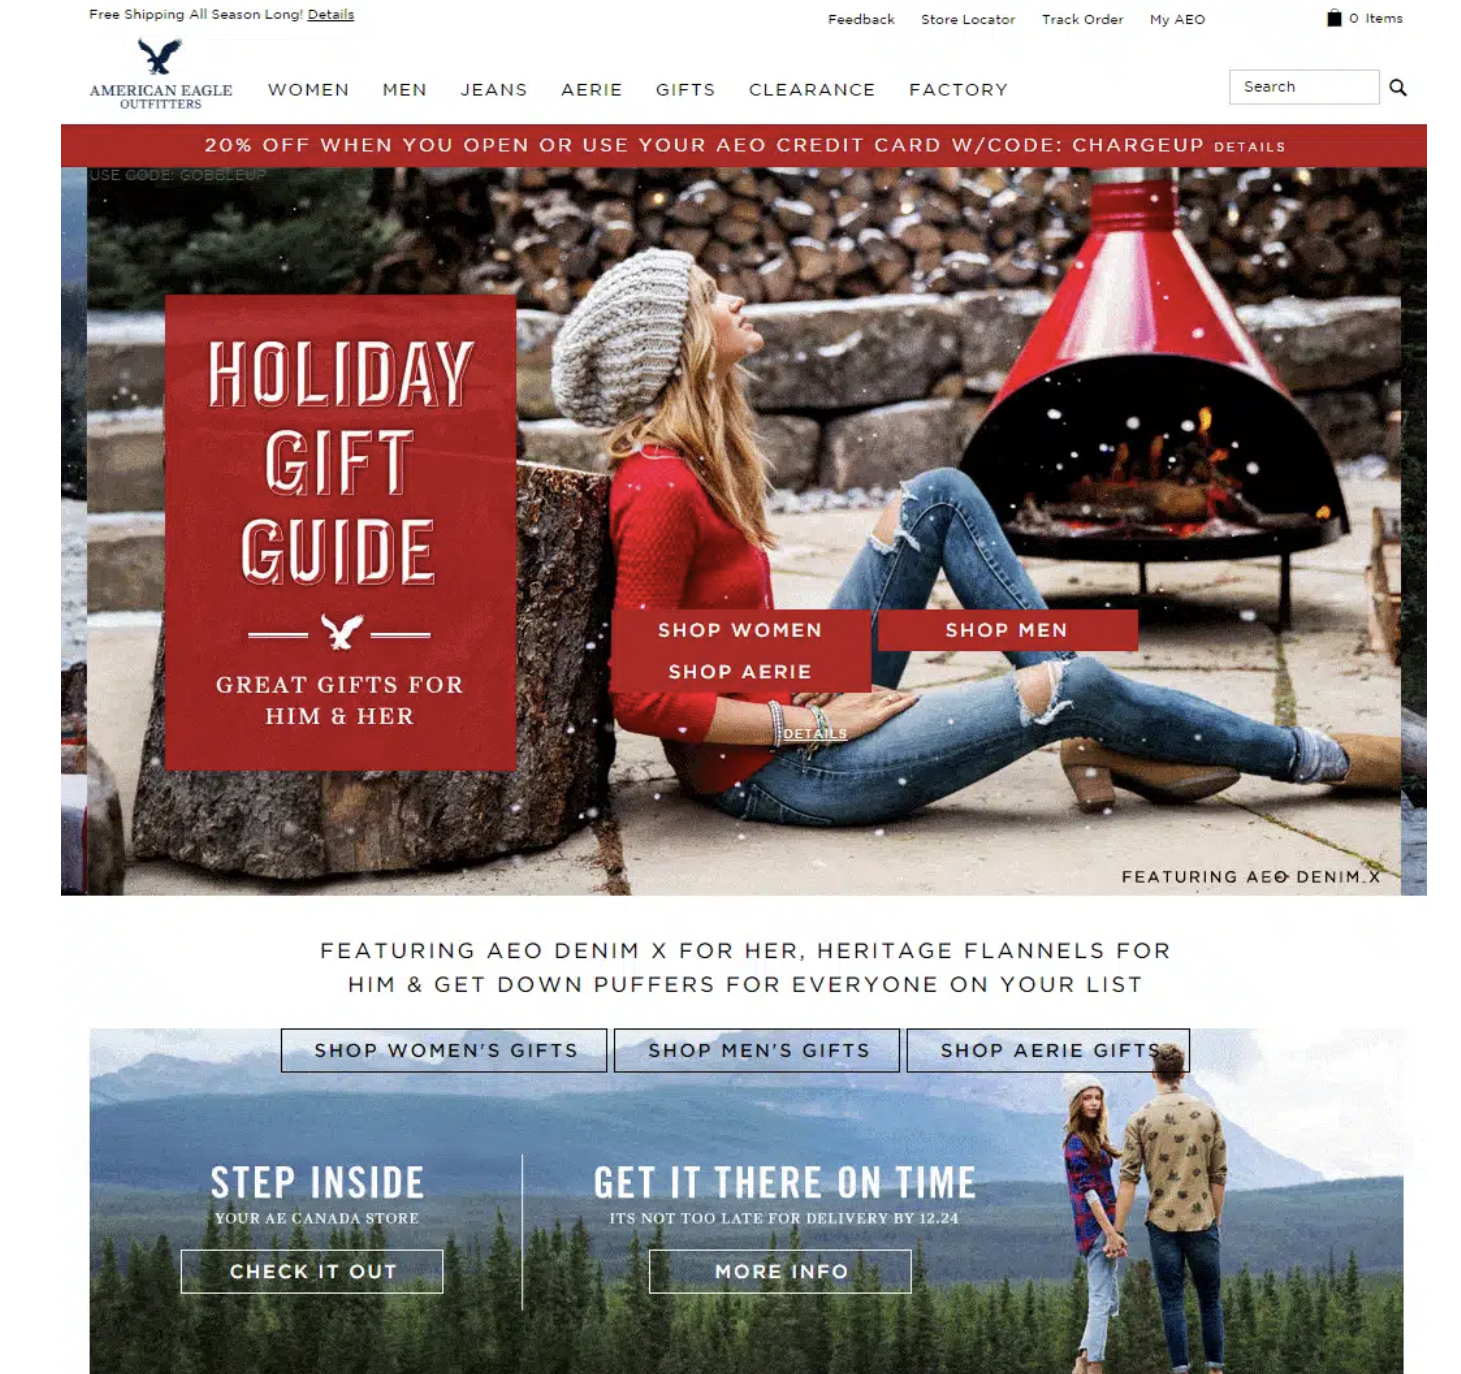 Promote Your Holiday Events Effectively on Your Shopify